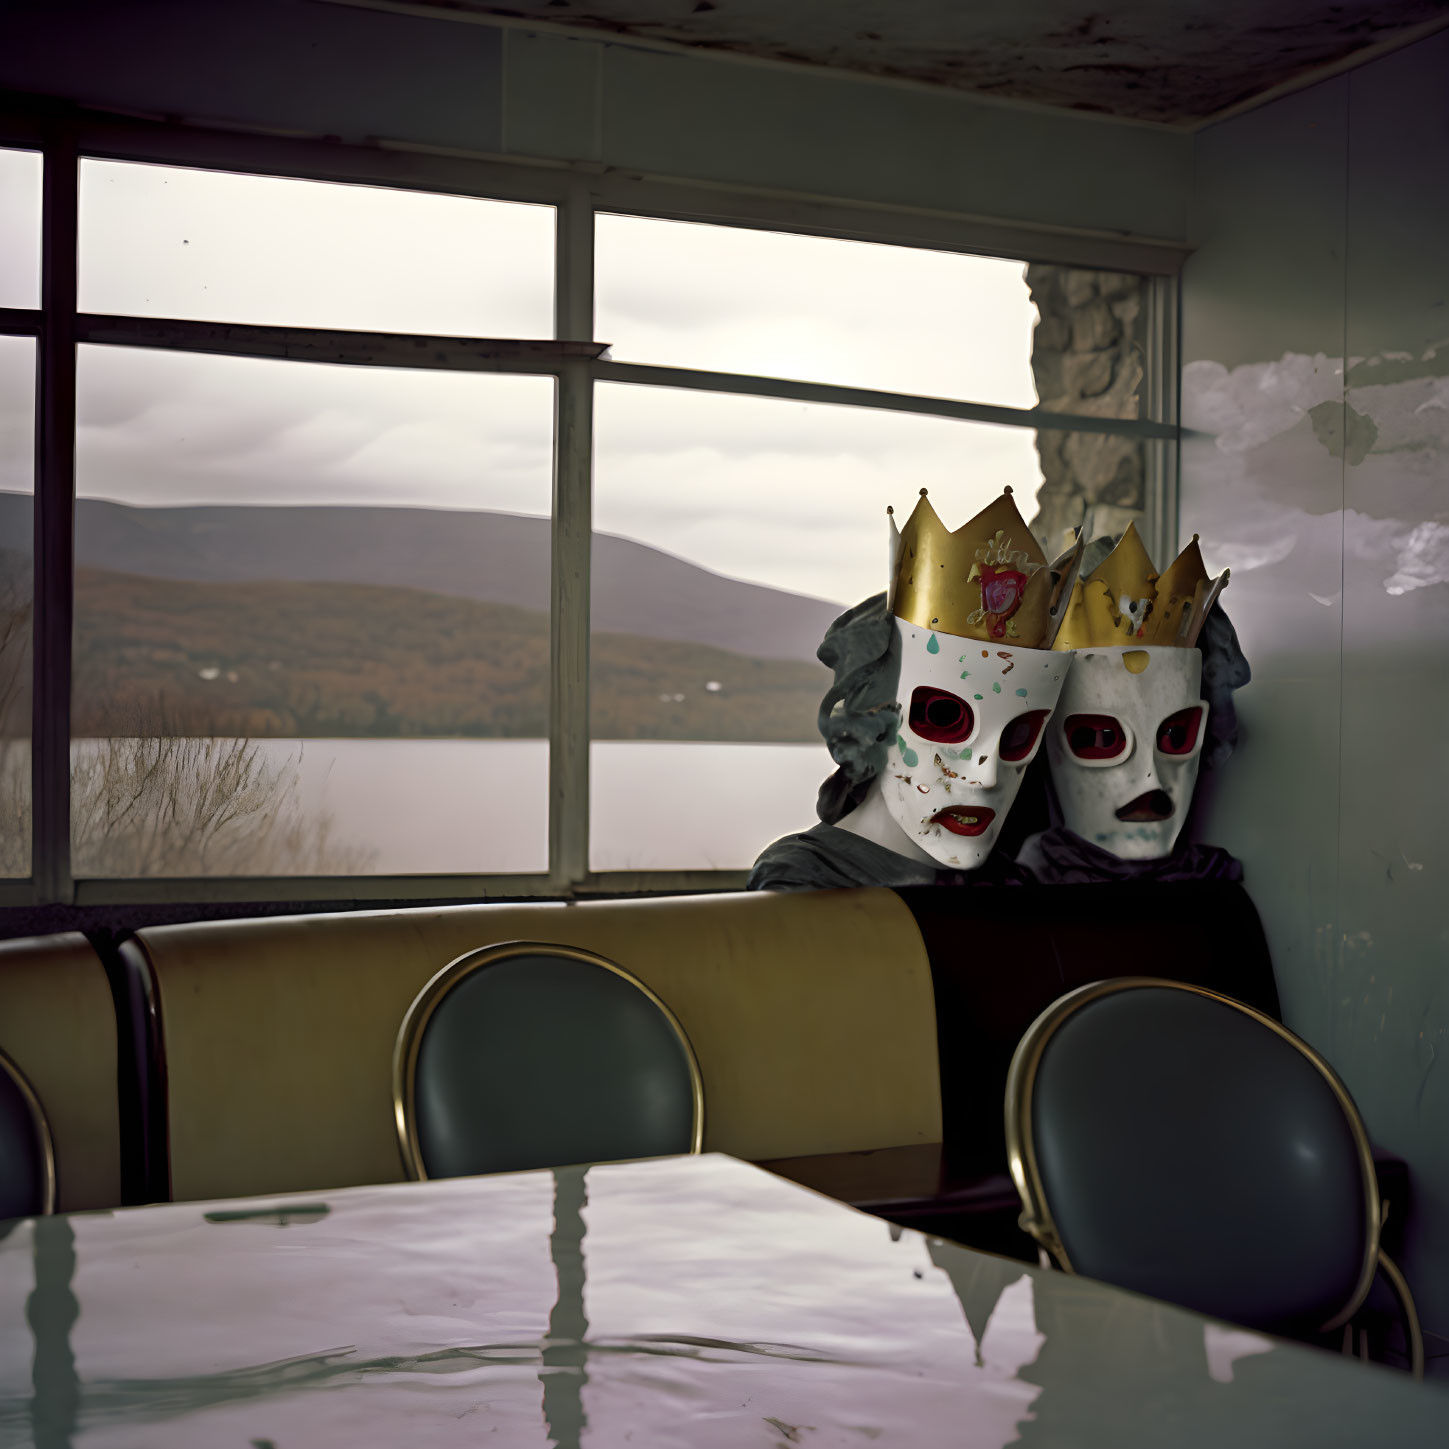 Two individuals in white masks and paper crowns at diner table by lake and hills.